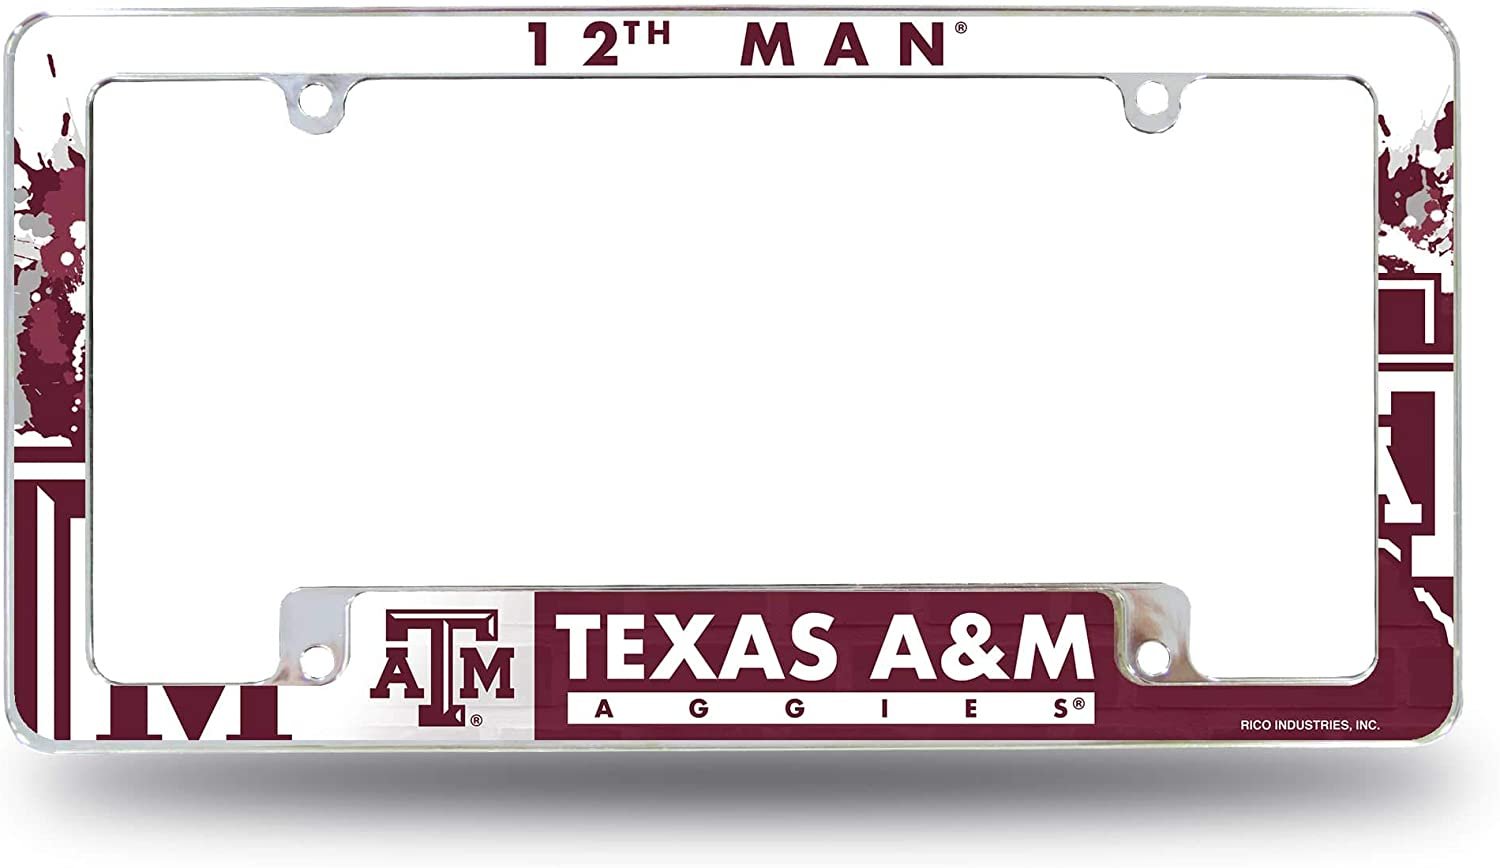 Texas A&M Aggies Metal License Plate Frame Tag Cover All Over Design University